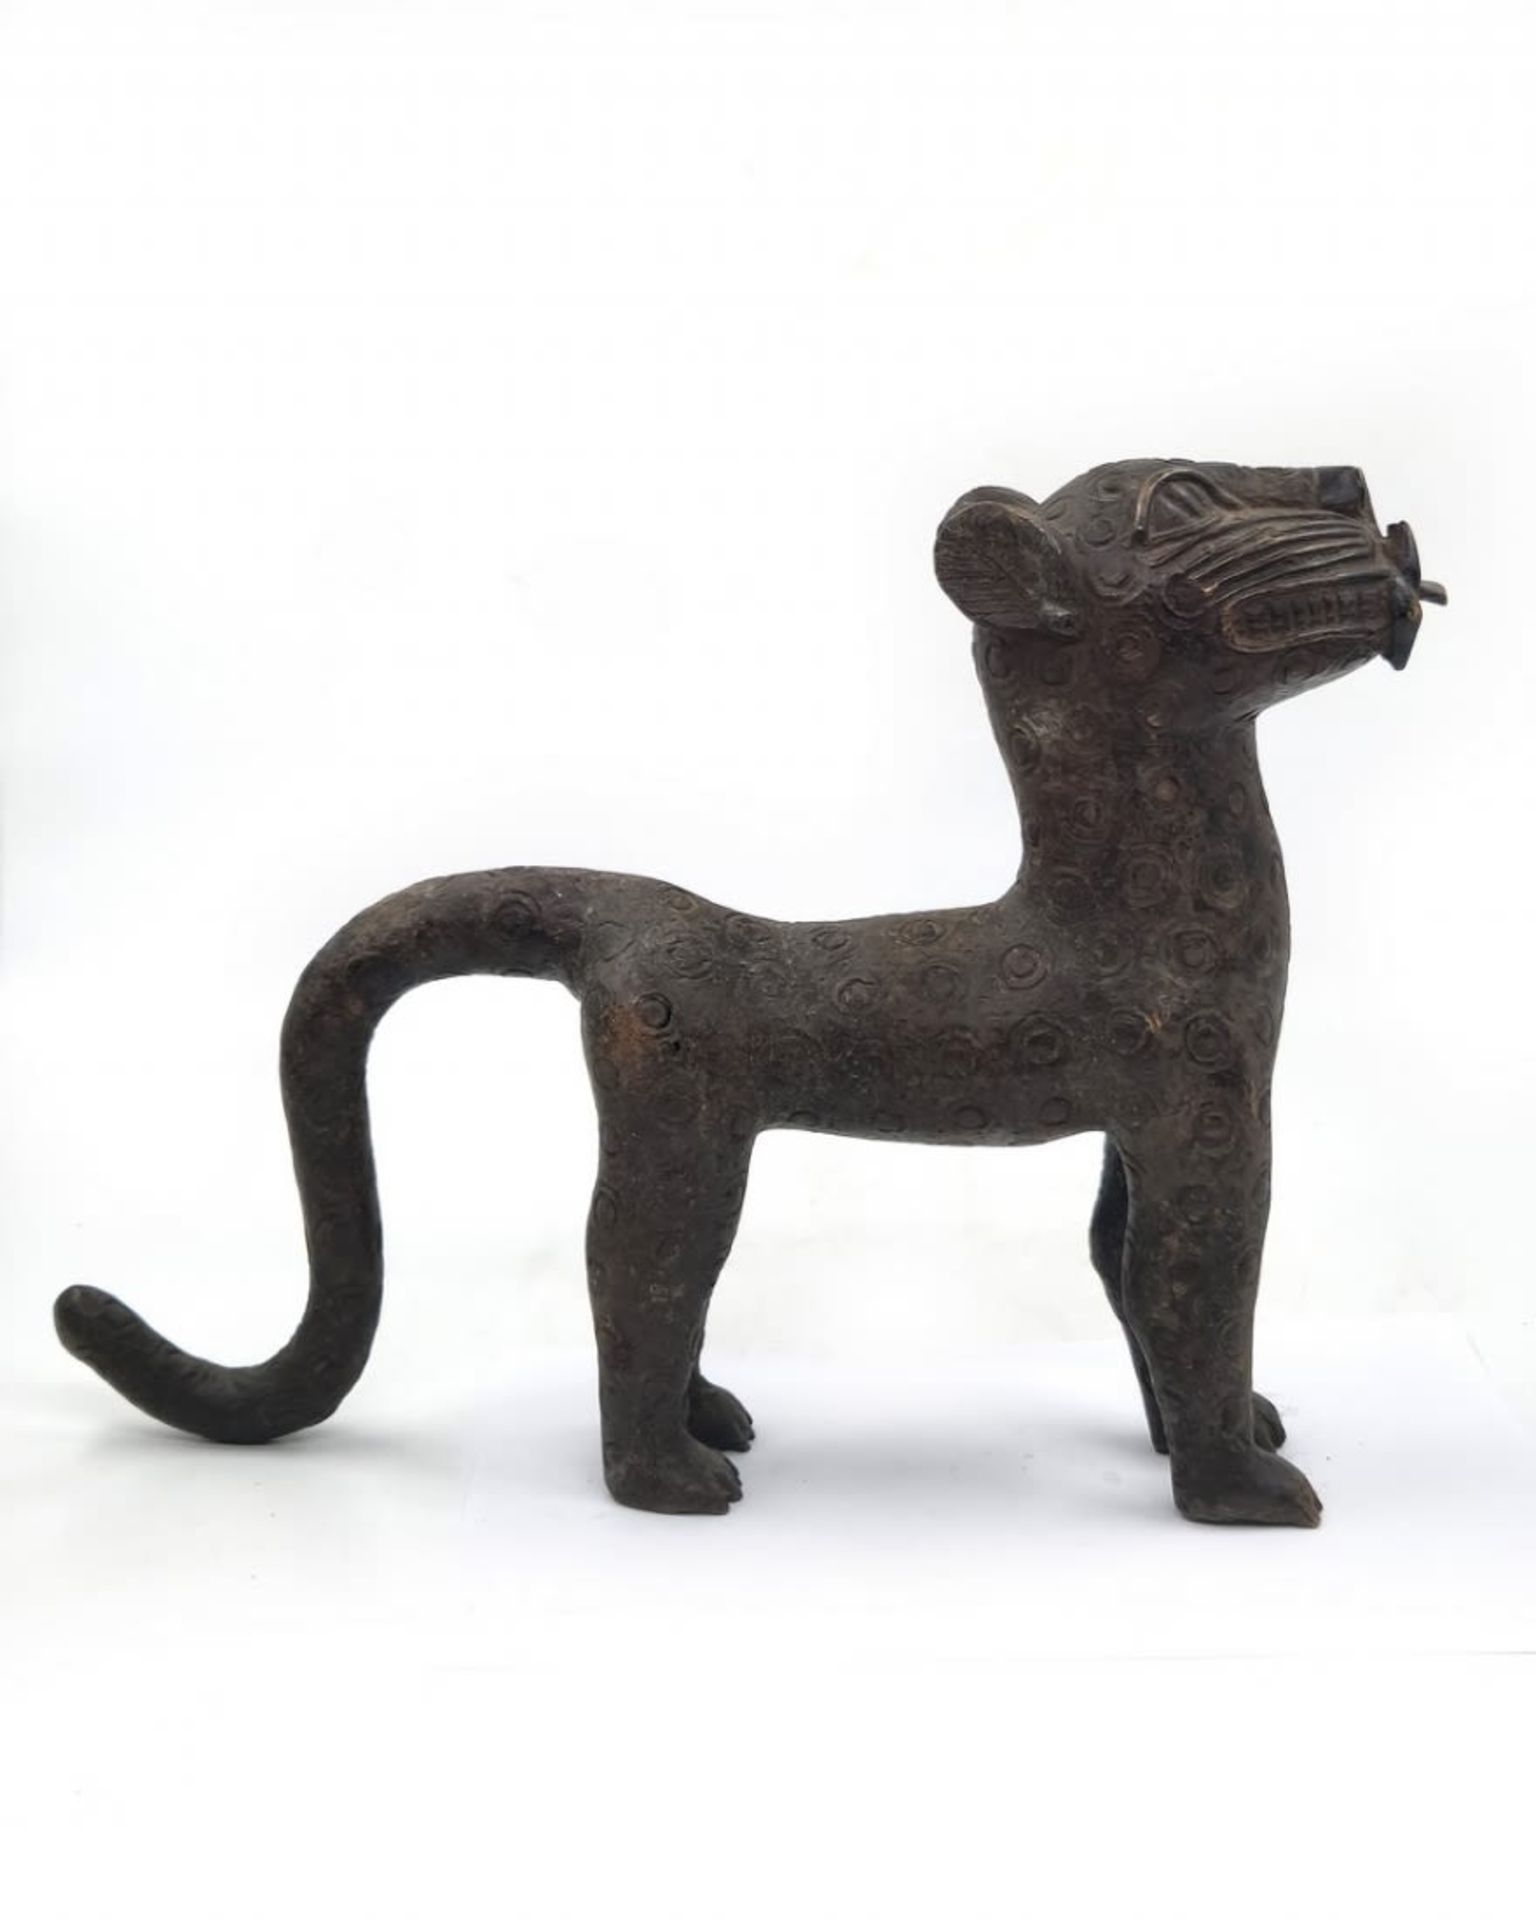 A pair of antique African statues, around hundred years old, in the form of panthers, made in ' - Image 7 of 8